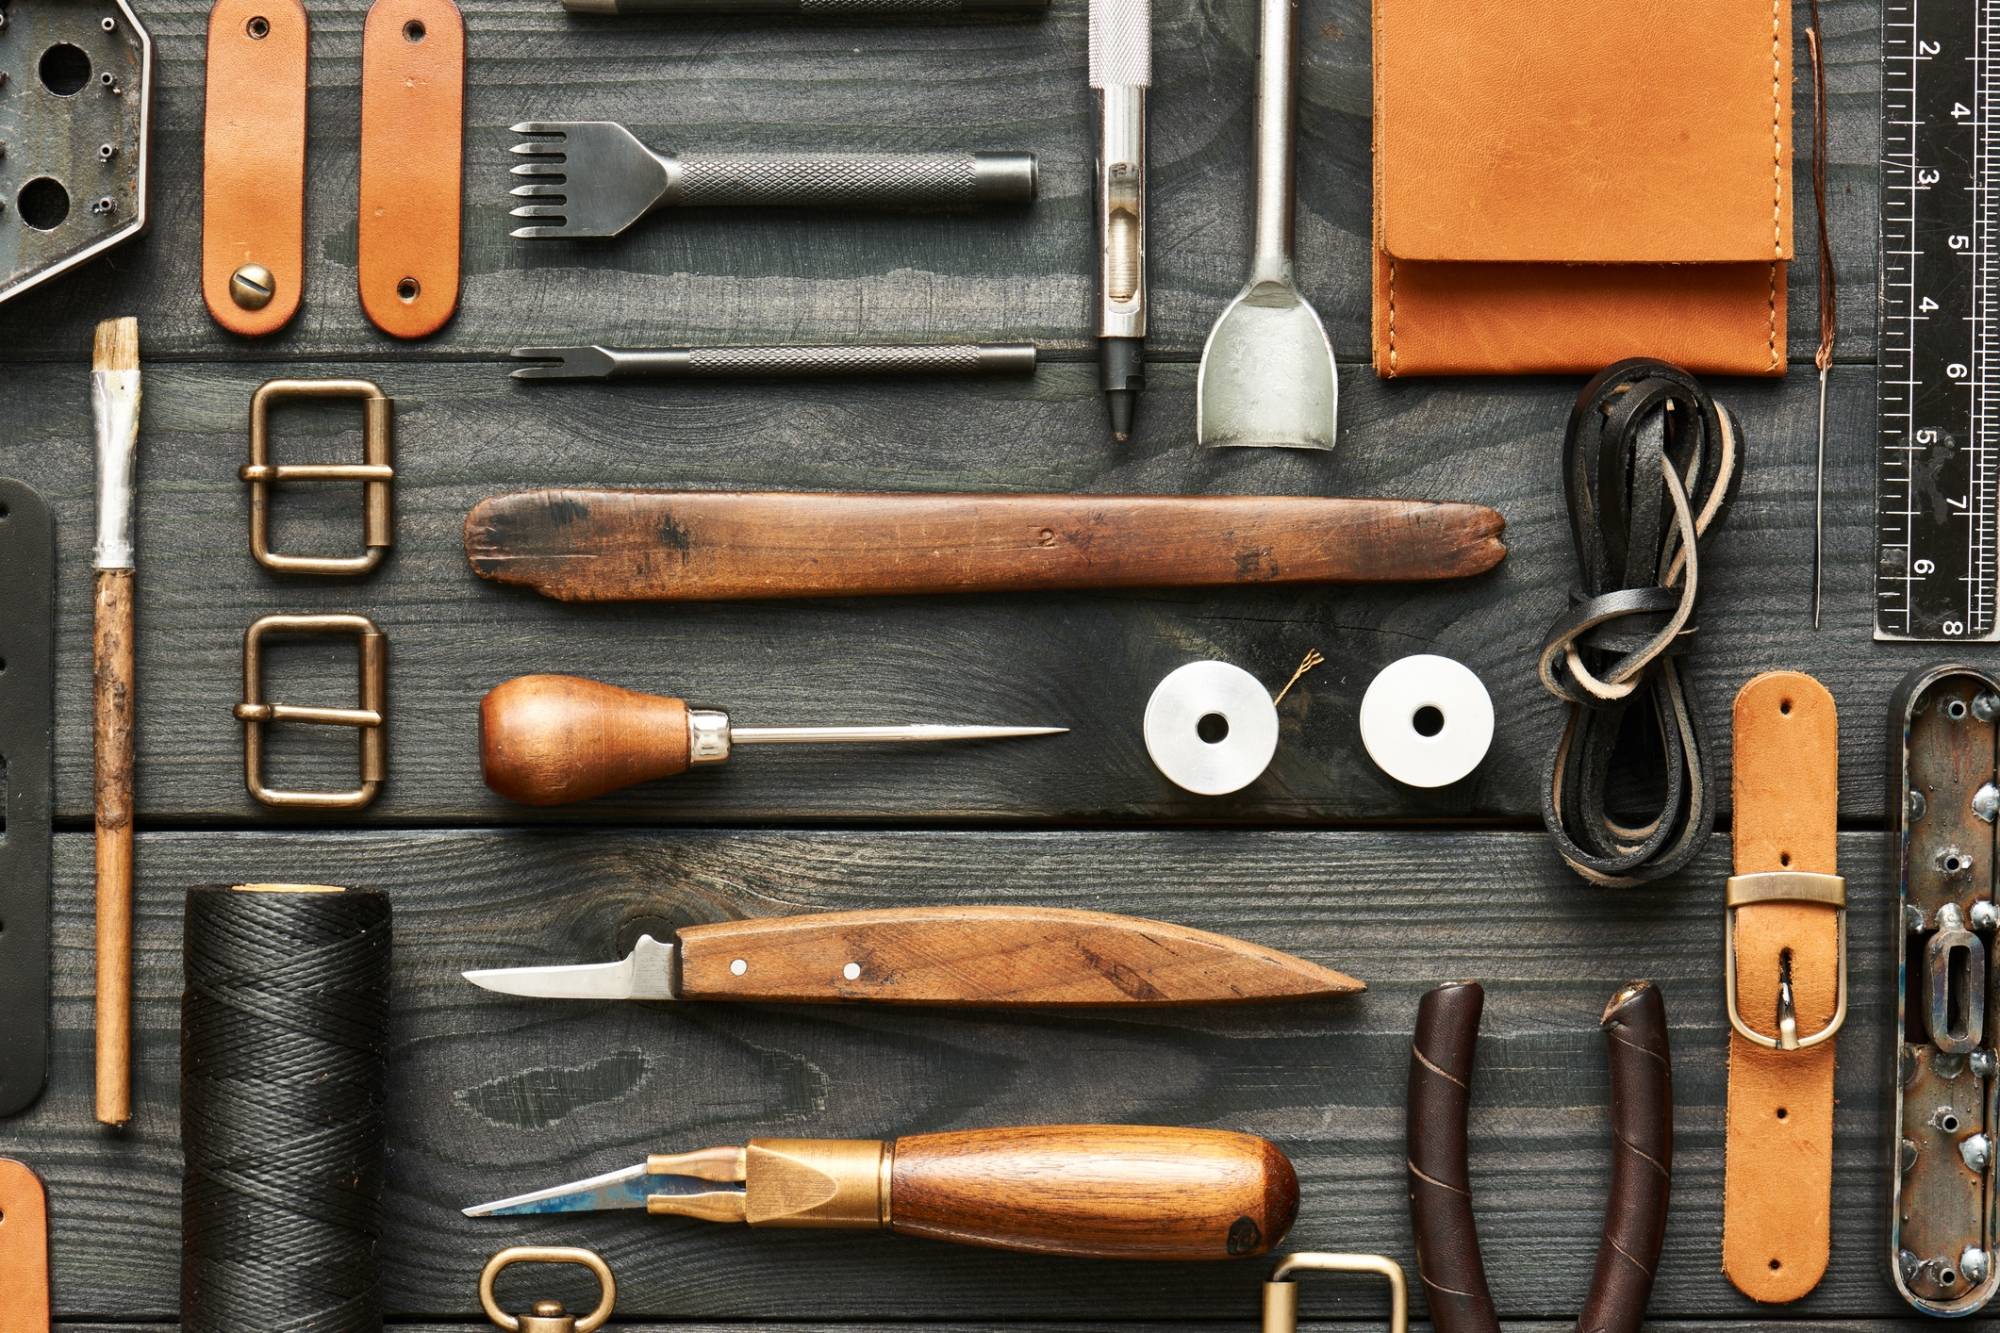 Leather Craft] 10 leather craft tools for beginners / basic